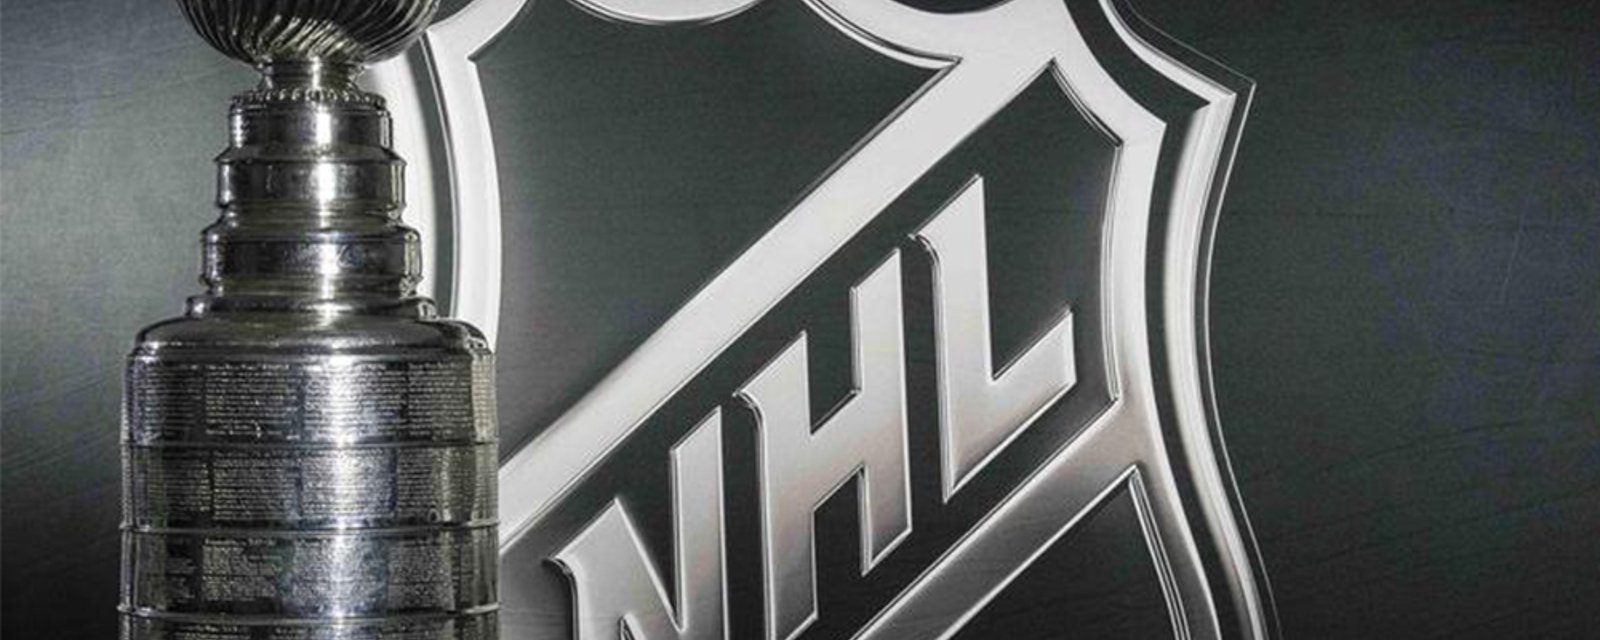 NHL releases an official update on the status of the 2019-20 season